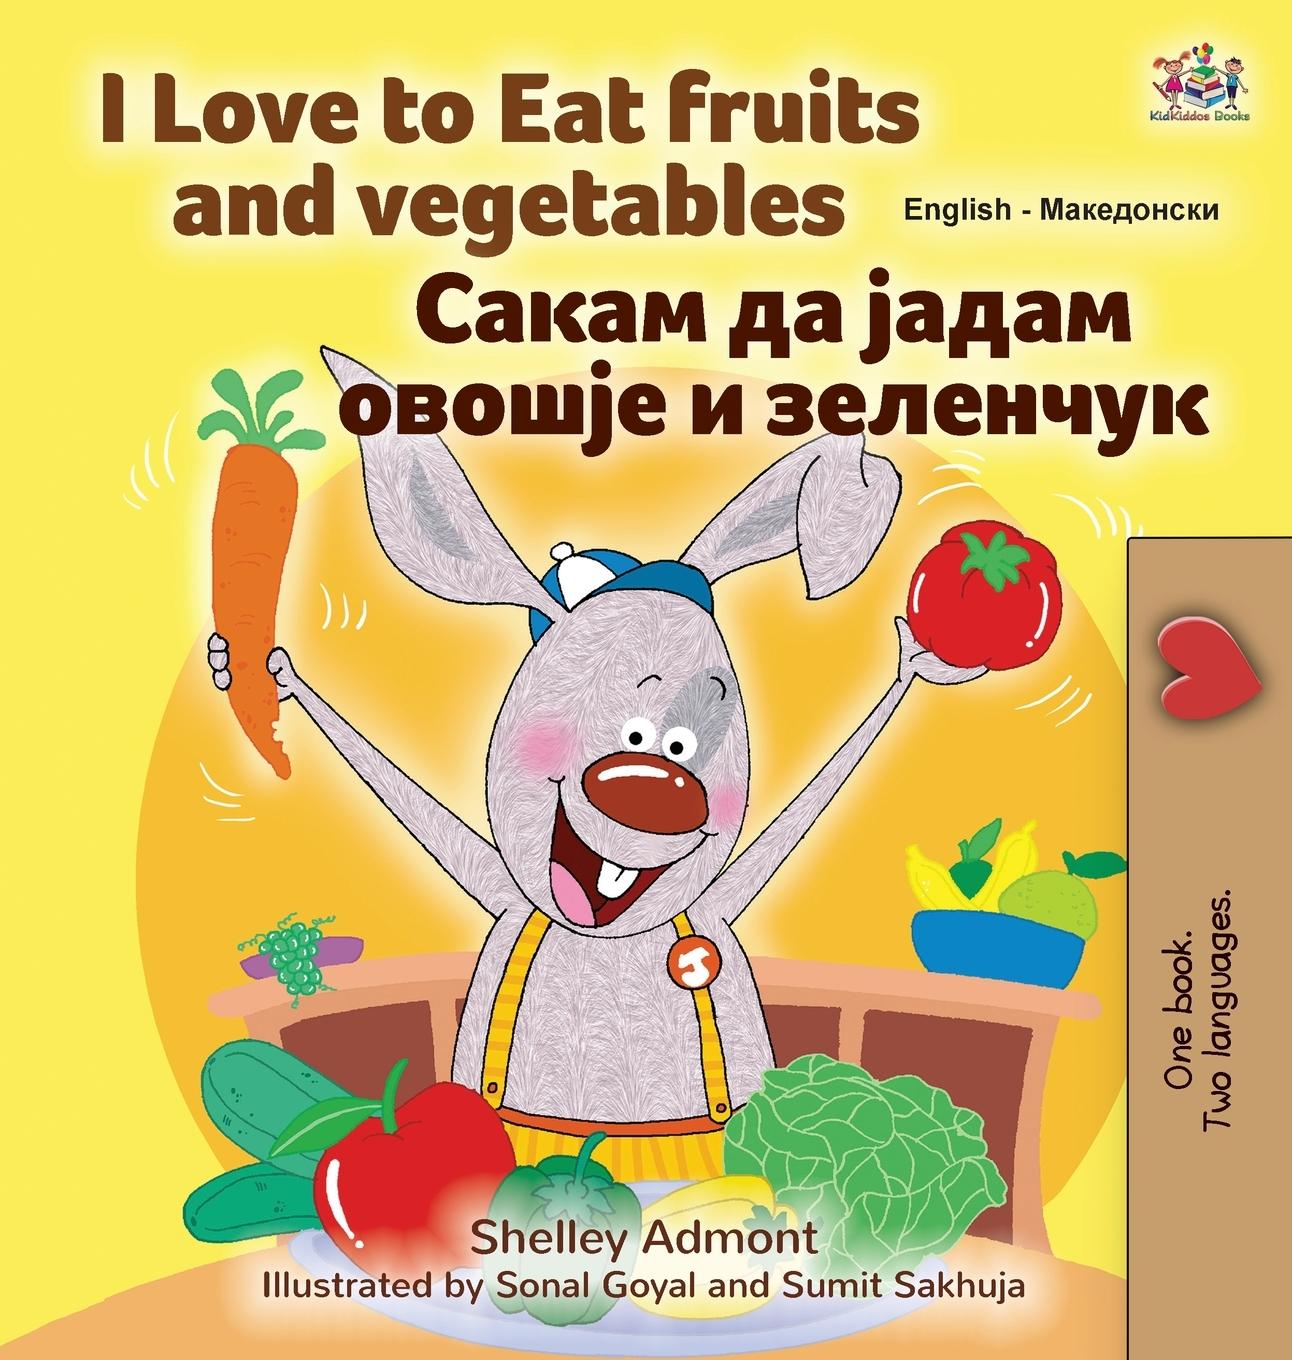 Book I Love to Eat Fruits and Vegetables (English Macedonian Bilingual Children's Book) Kidkiddos Books